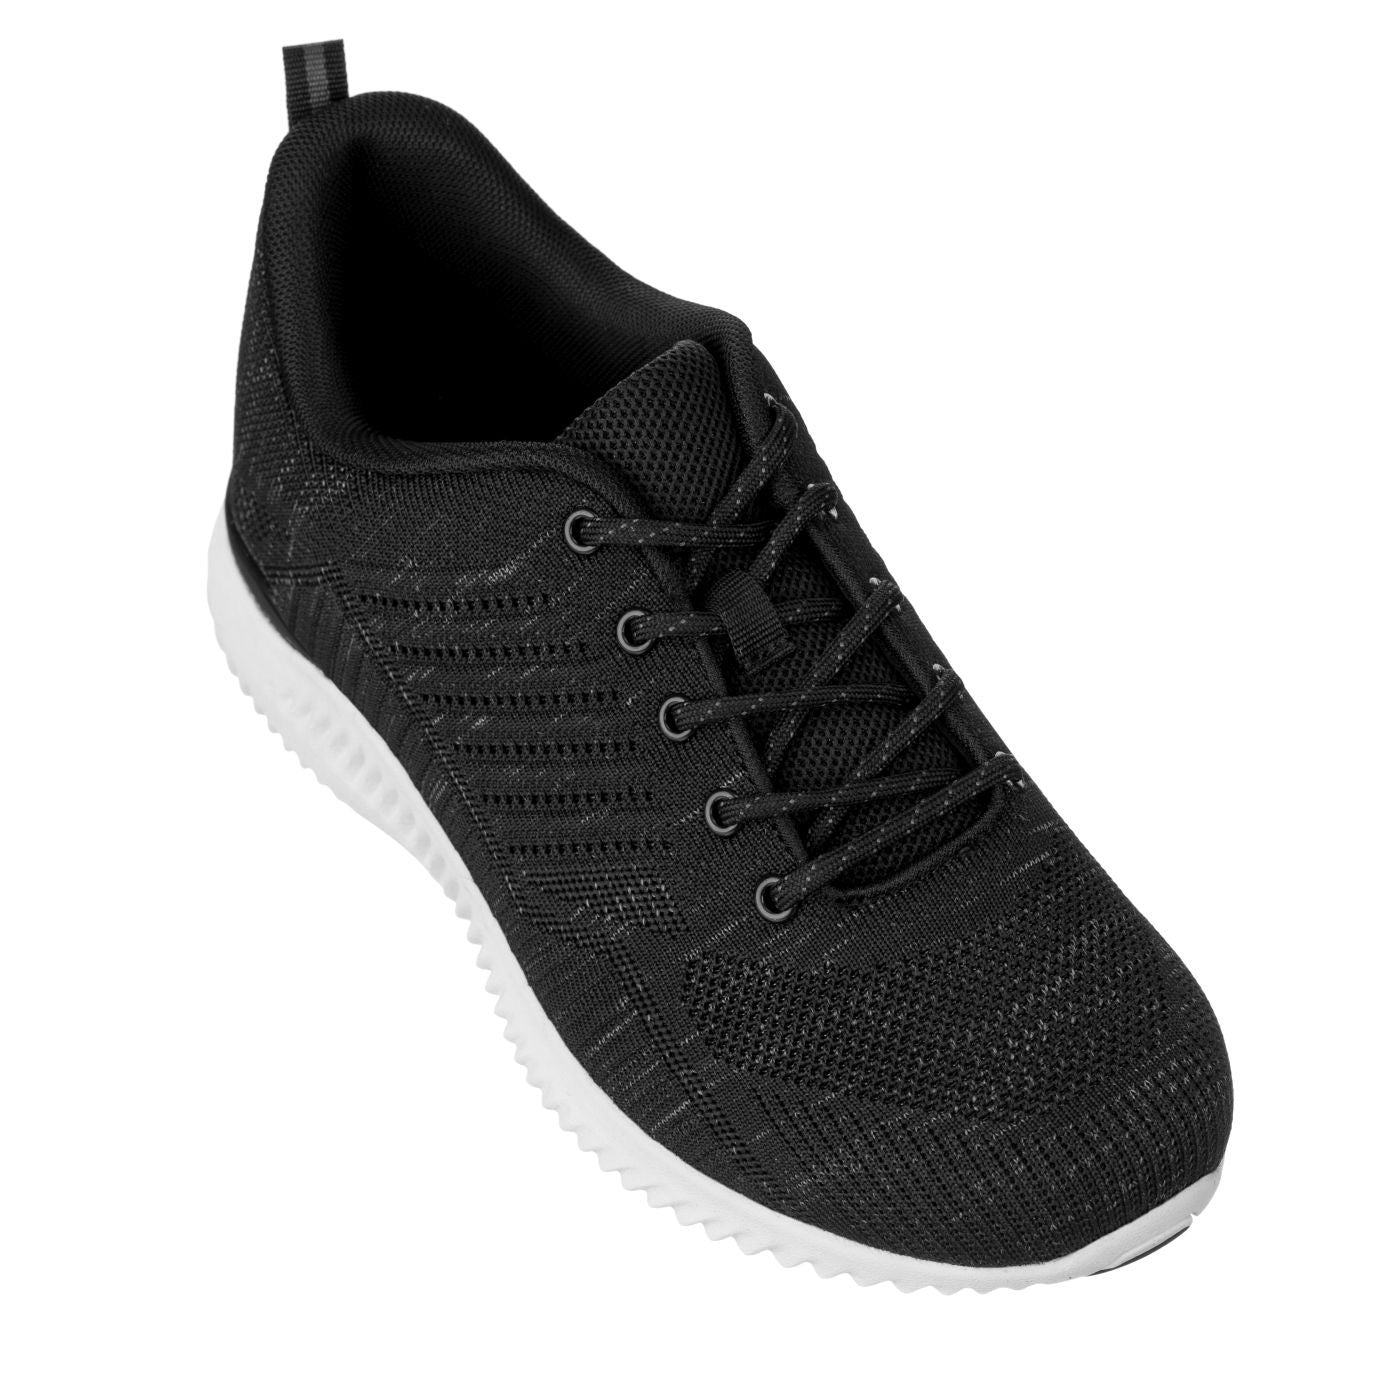 Elevator shoes height increase CALTO - Q212 - 2.6 Inches Taller (Black/Grey) - Ultra Lightweight